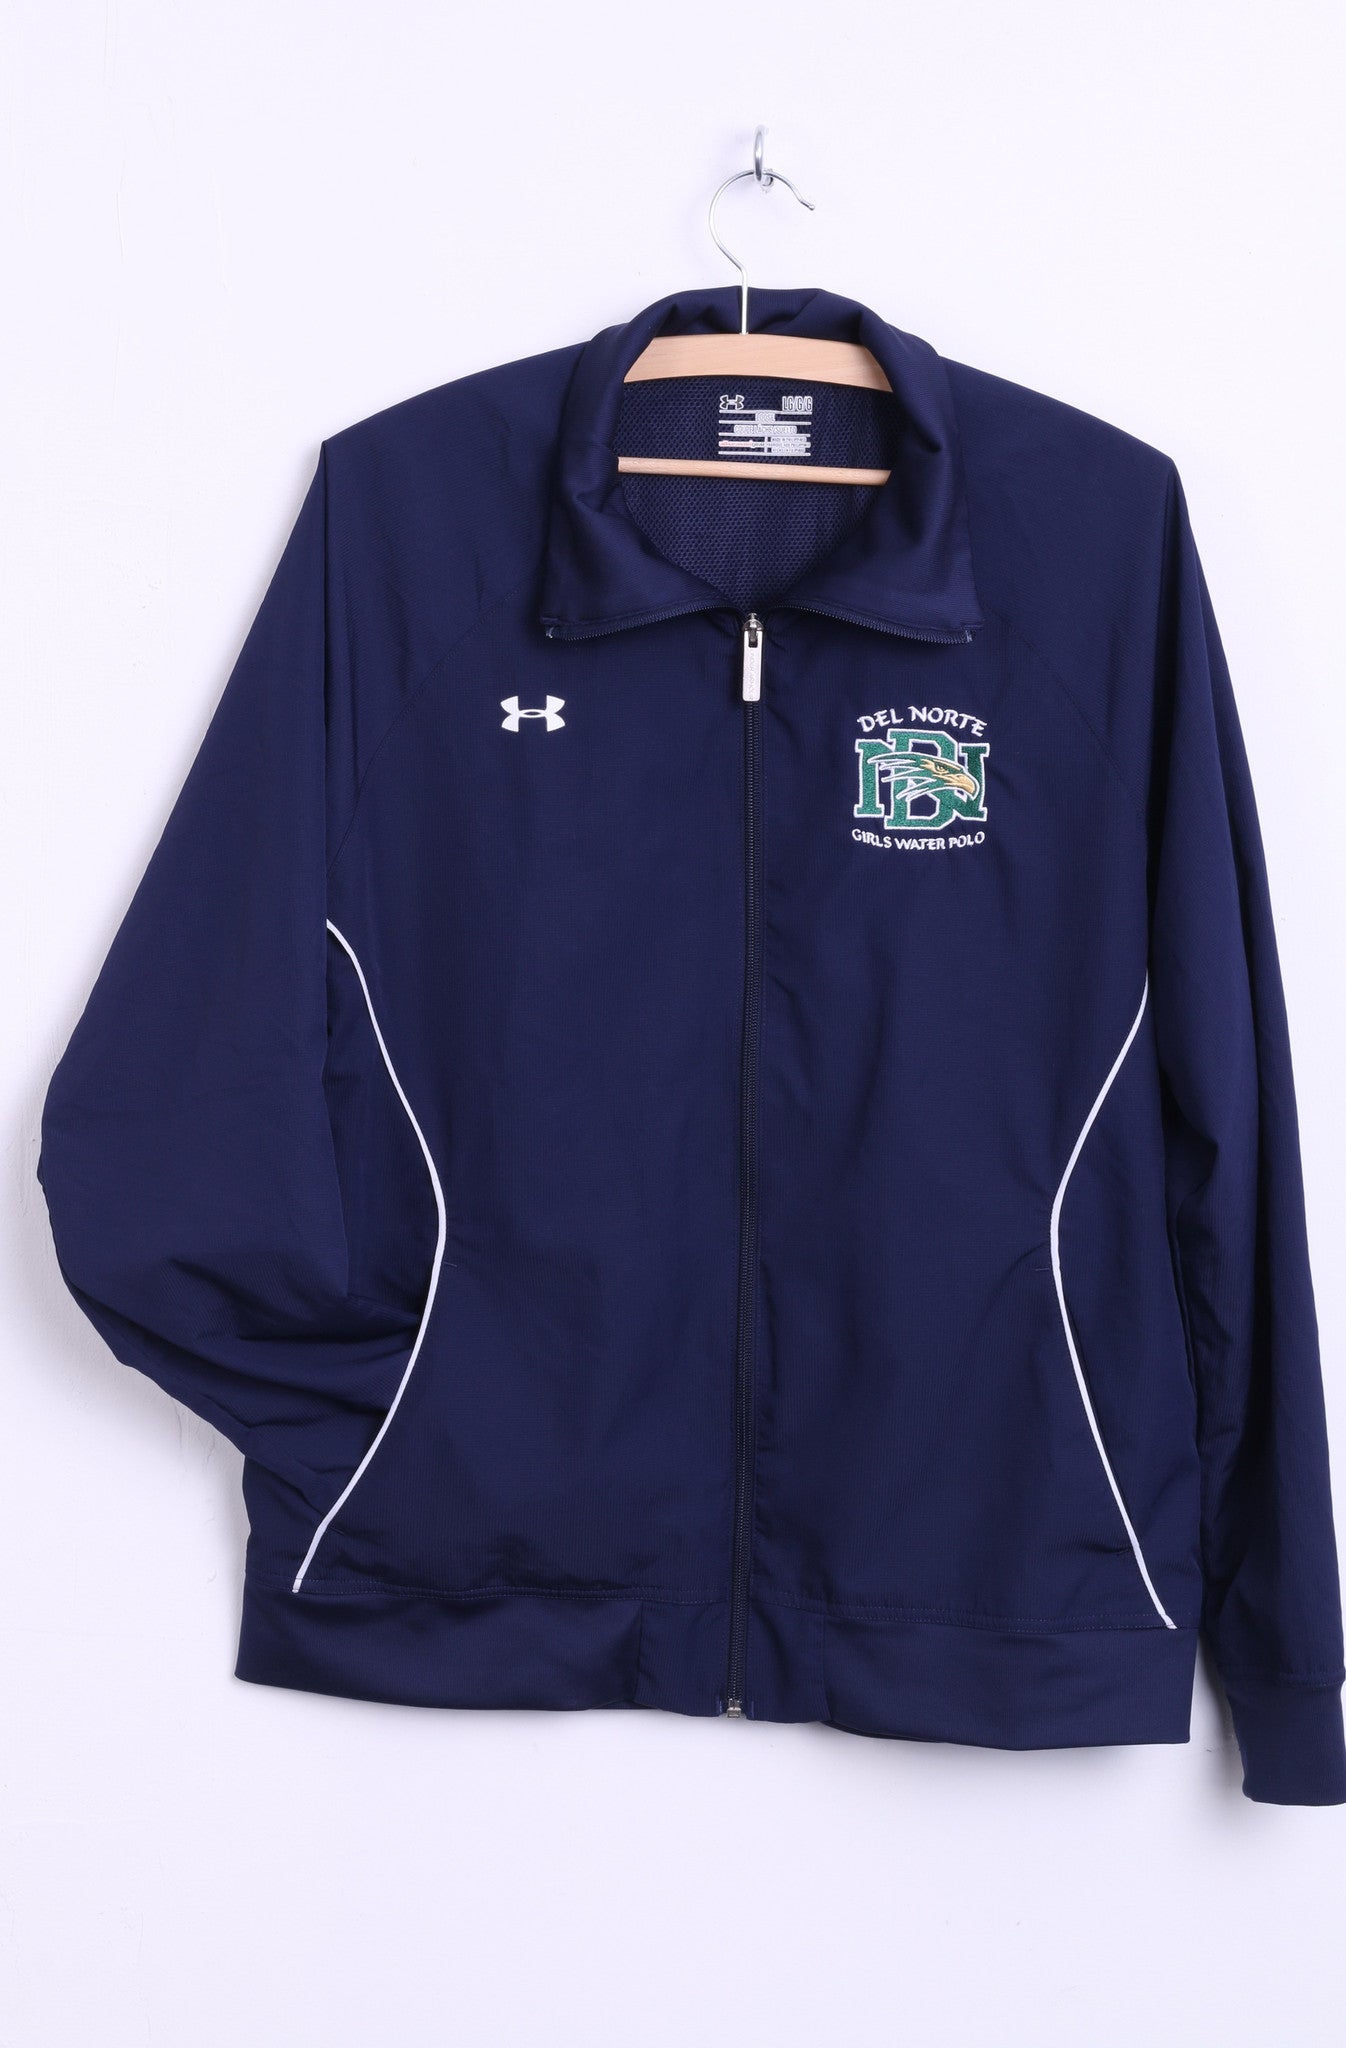 Under Armour Womens L Jacket Del Norte Girls Water Polo Navy